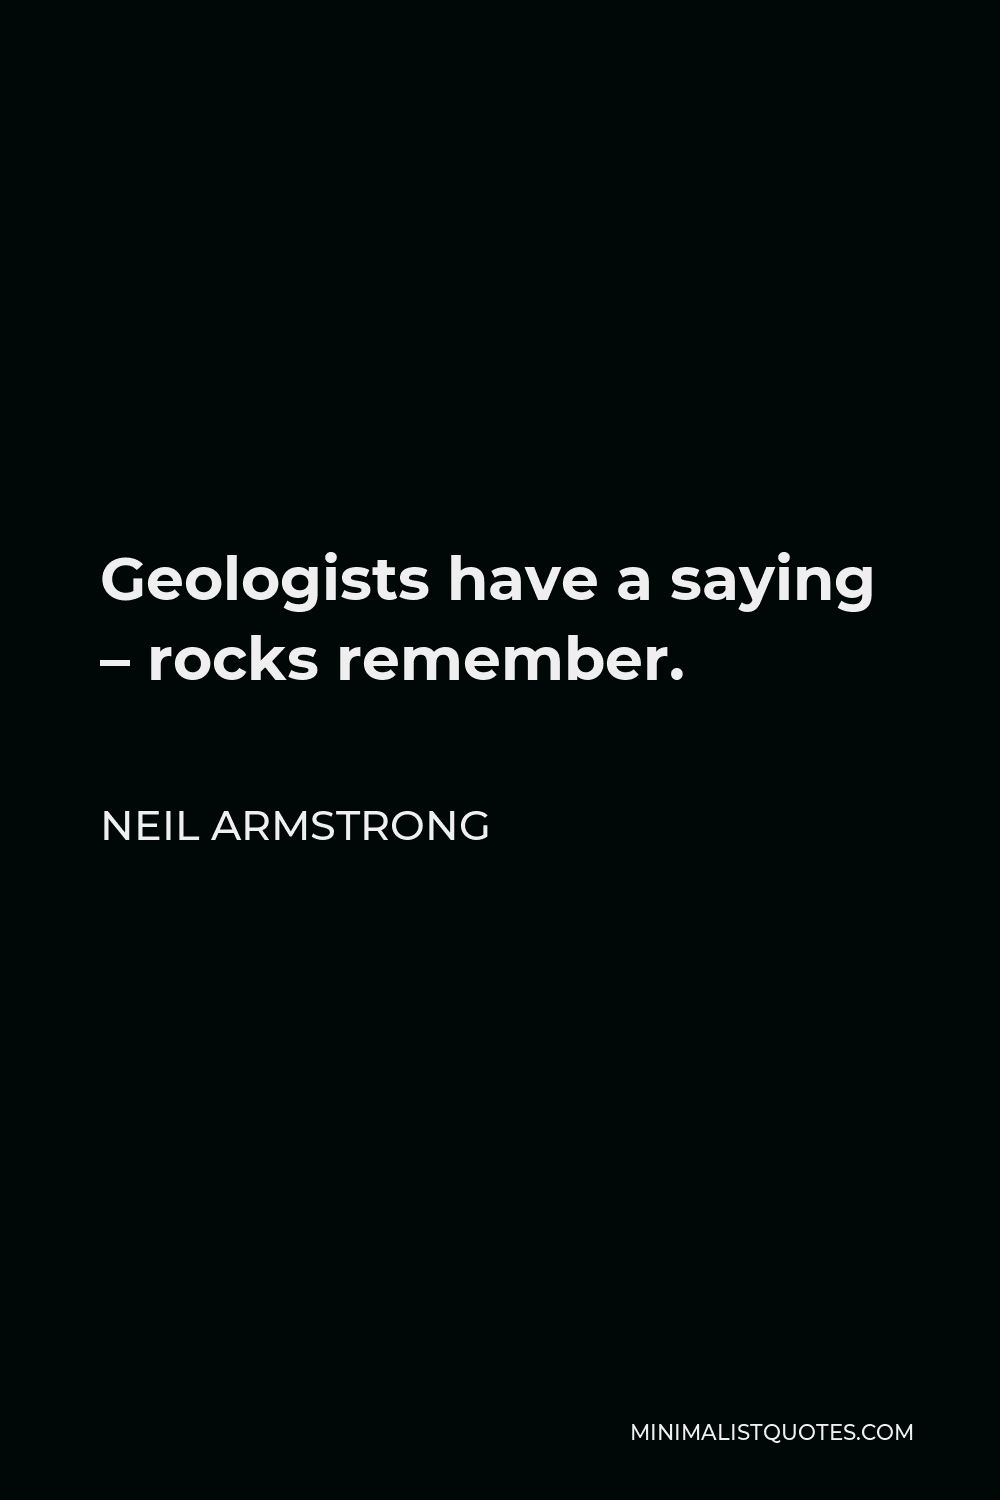 Neil Armstrong Quote - Geologists have a saying – rocks remember.